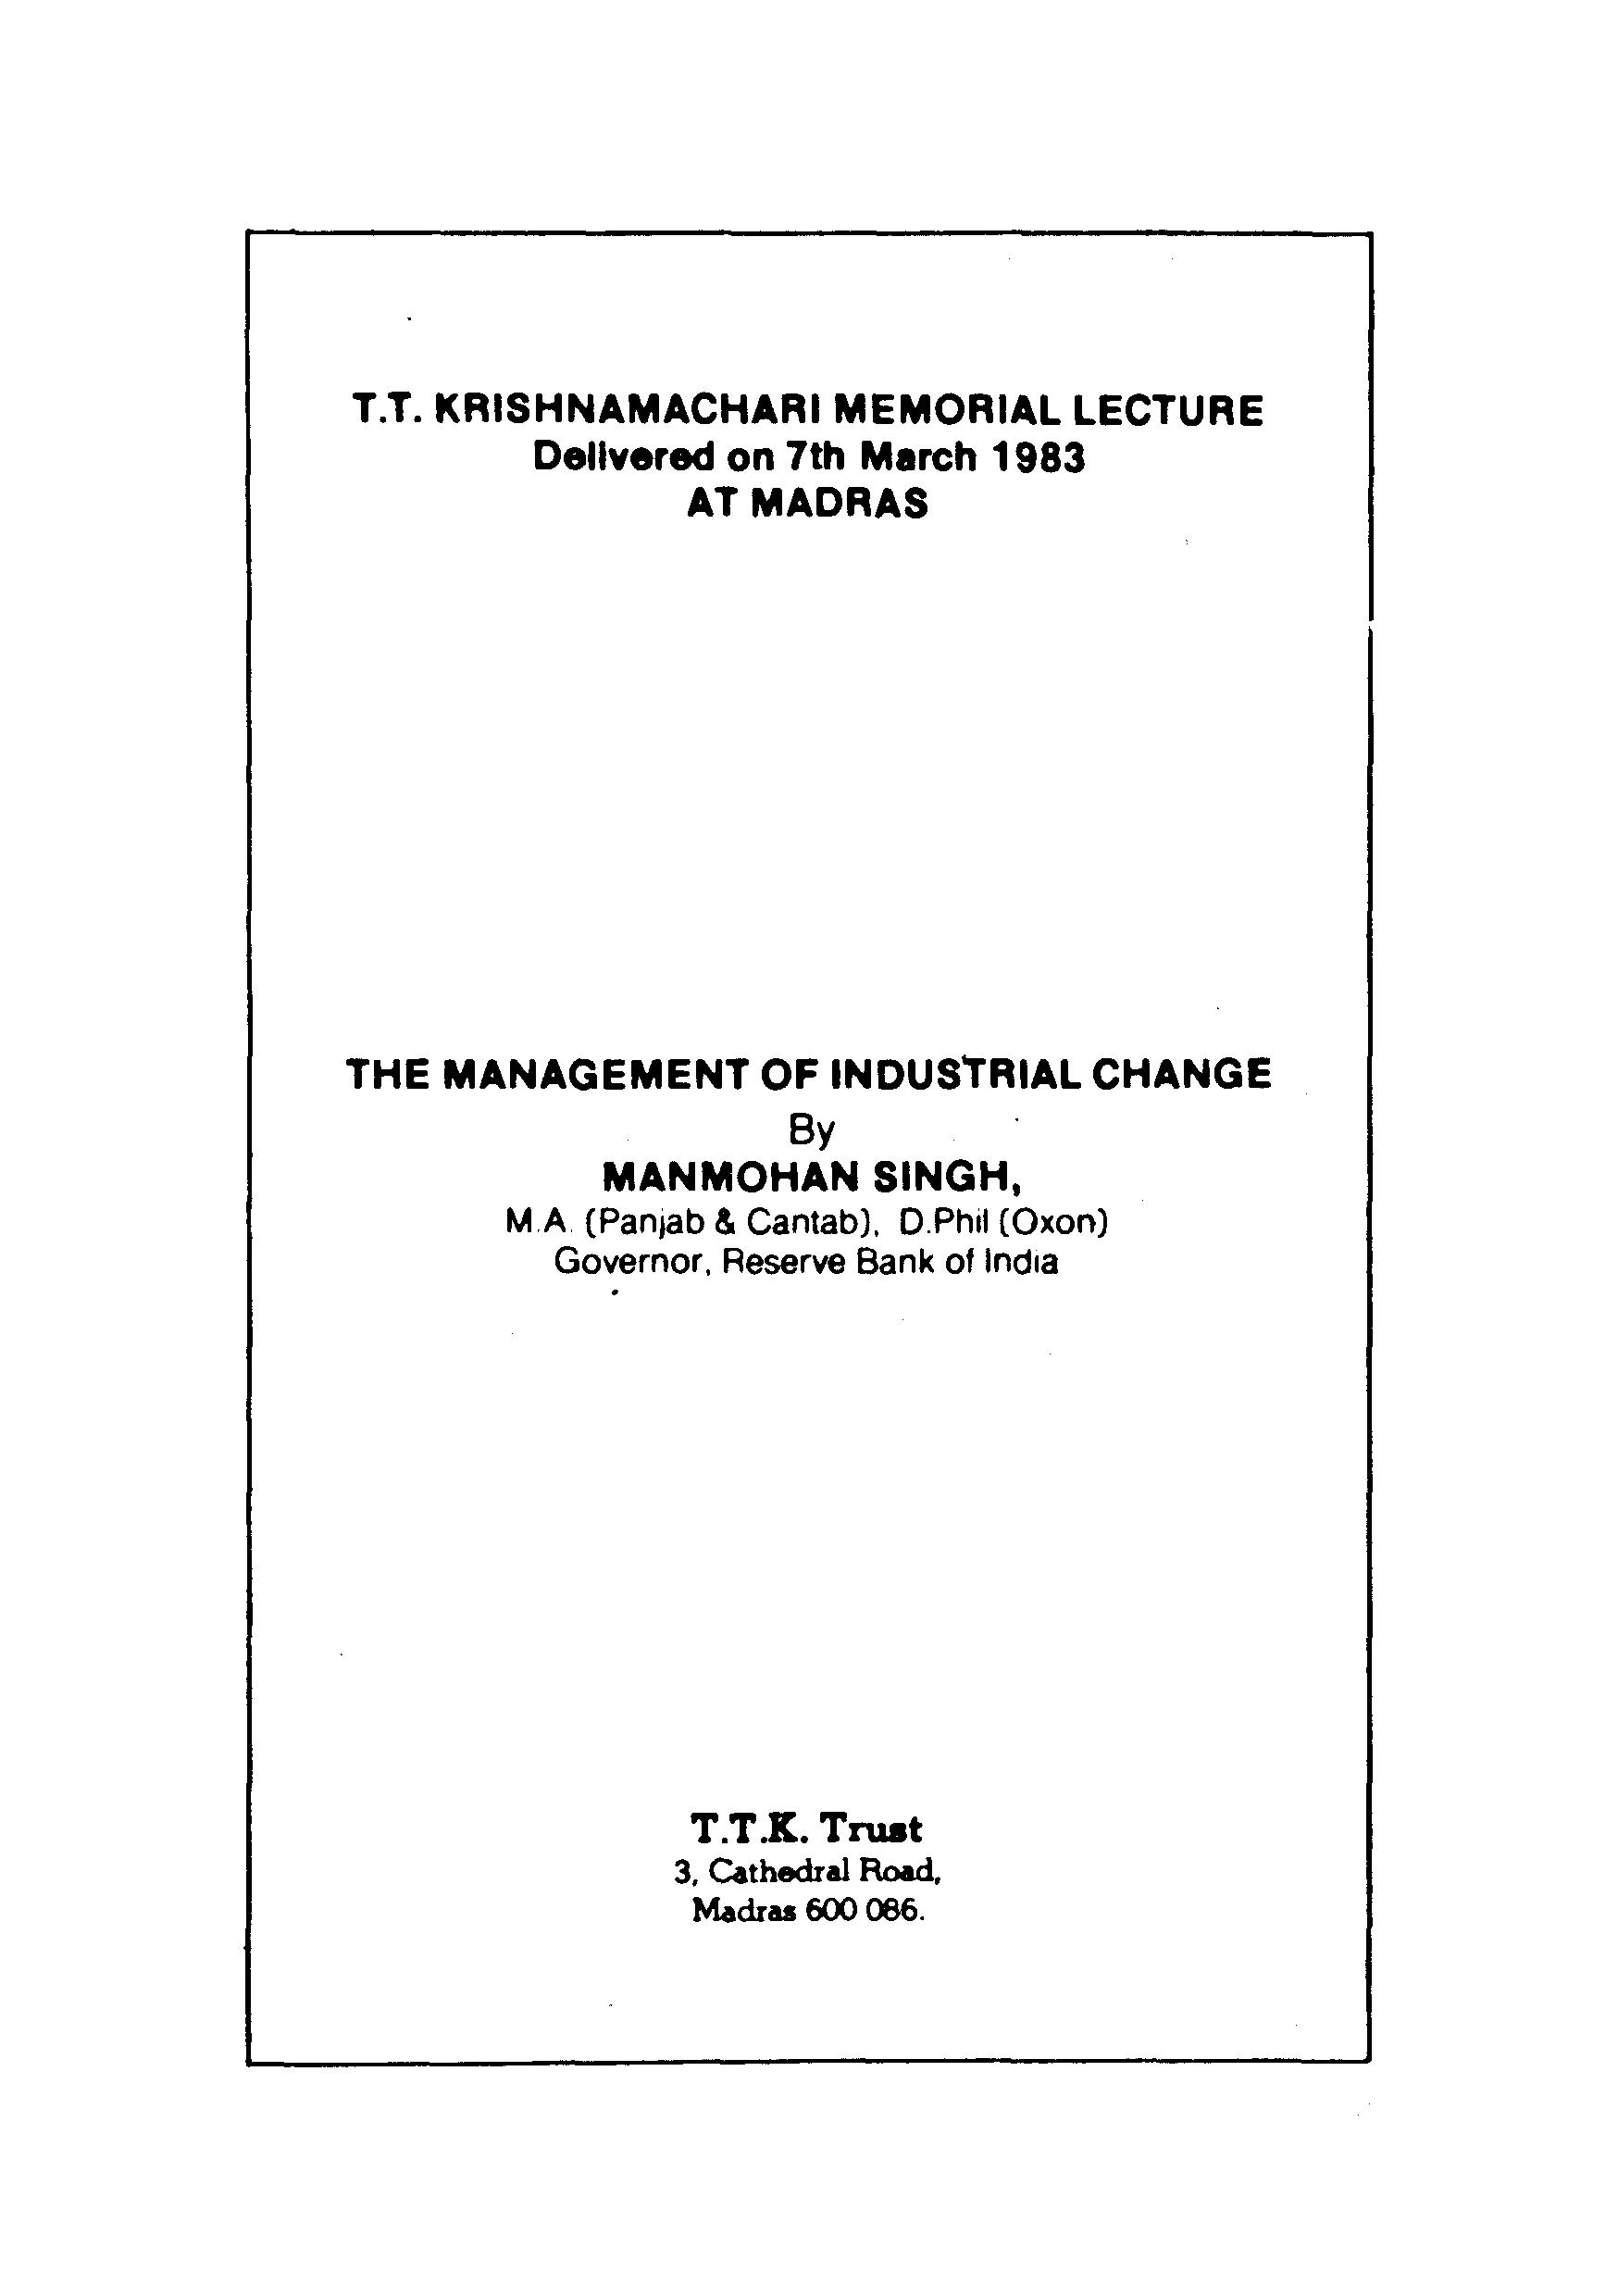 T.T.Krishnamachari Memorial Lecture Delivered On 7th March 1983 At Madras